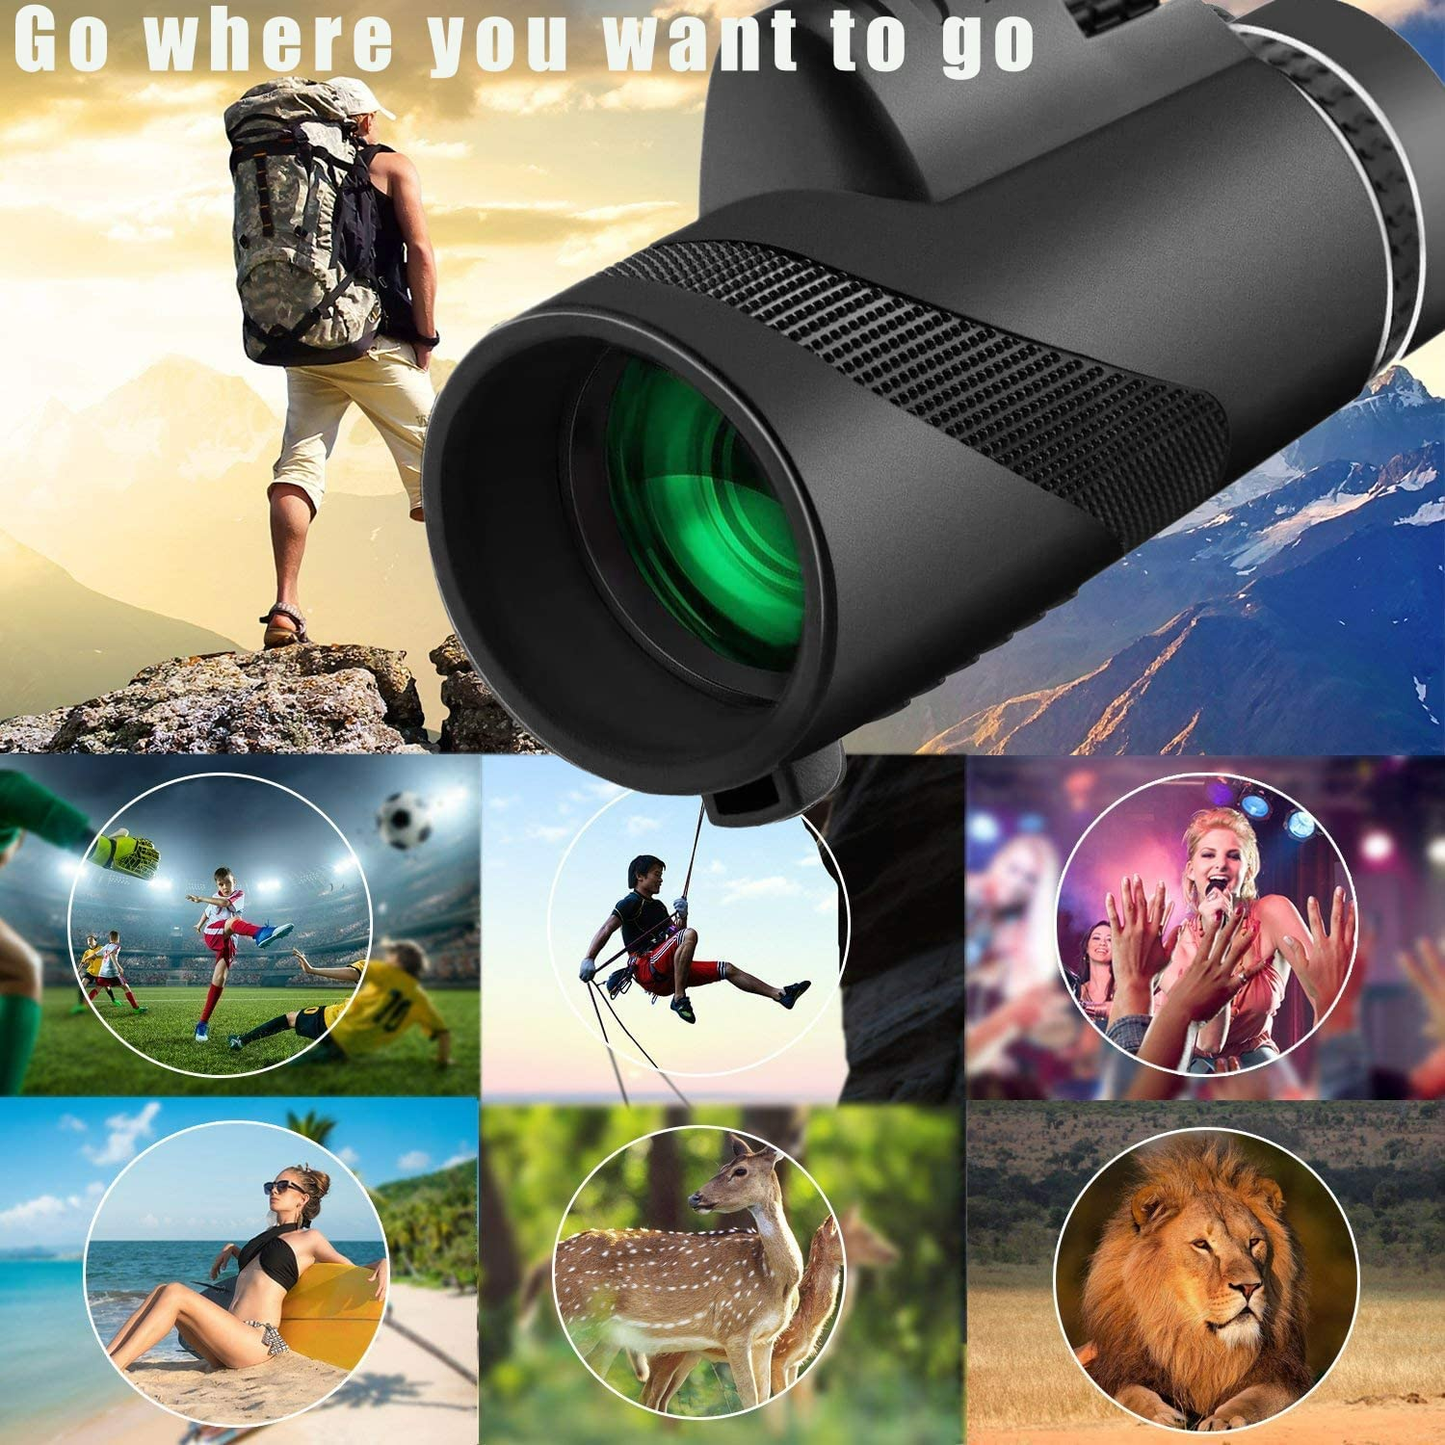 Monocular Telescope, High Powered Night Vision Monocular Telescope for Smartphone, Handheld Telescope with Phone Adapter